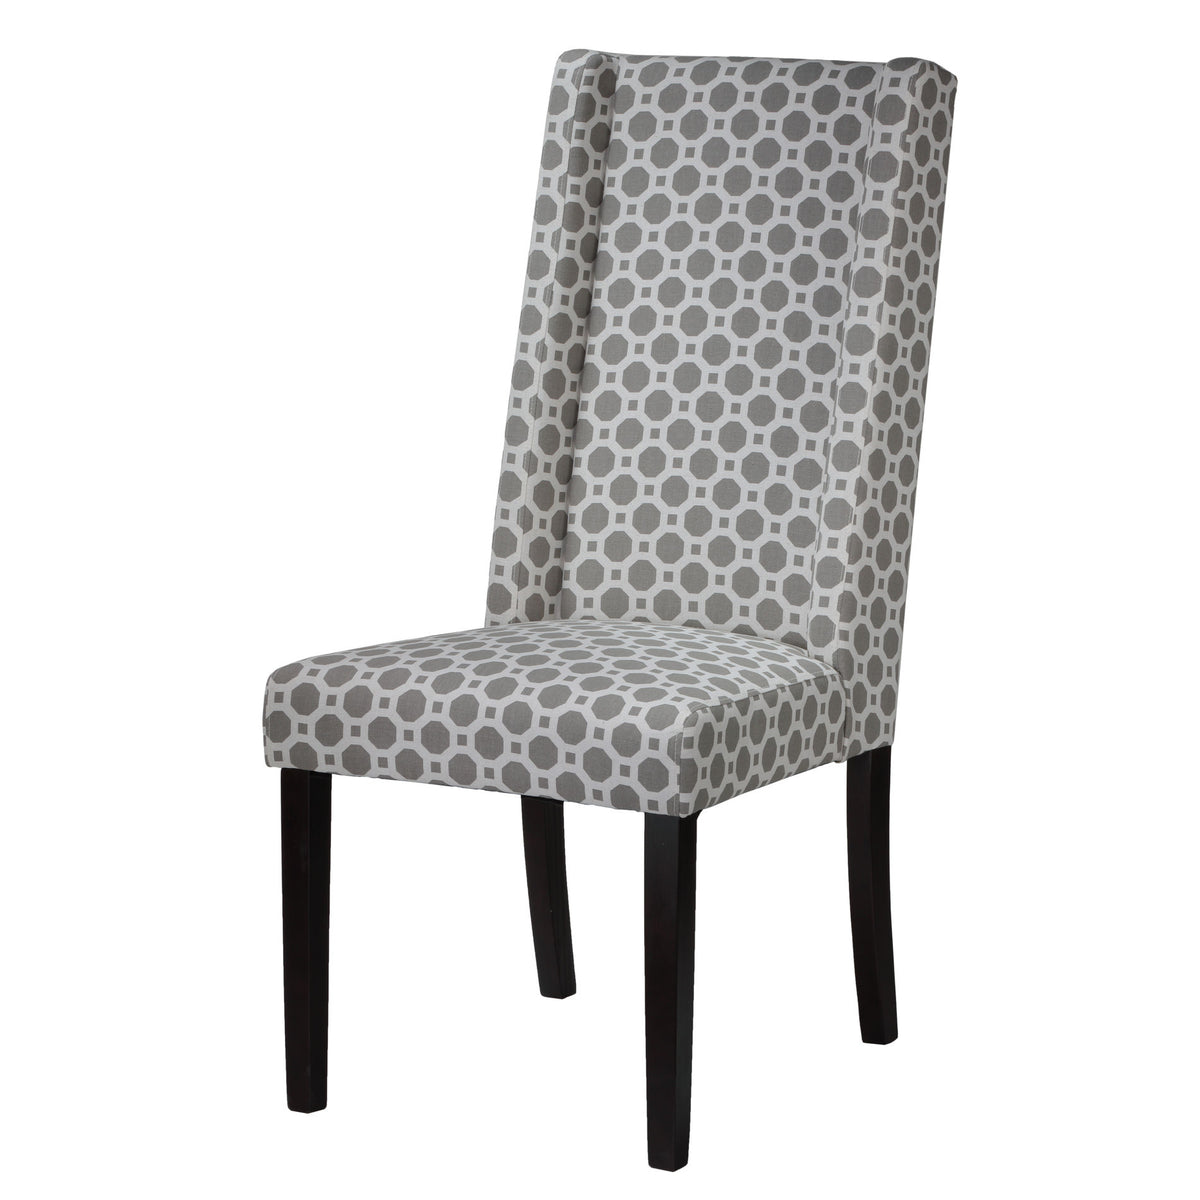 Cortesi Home Jenna Dining Chair in Grey Pattern Fabric (Set of 2)